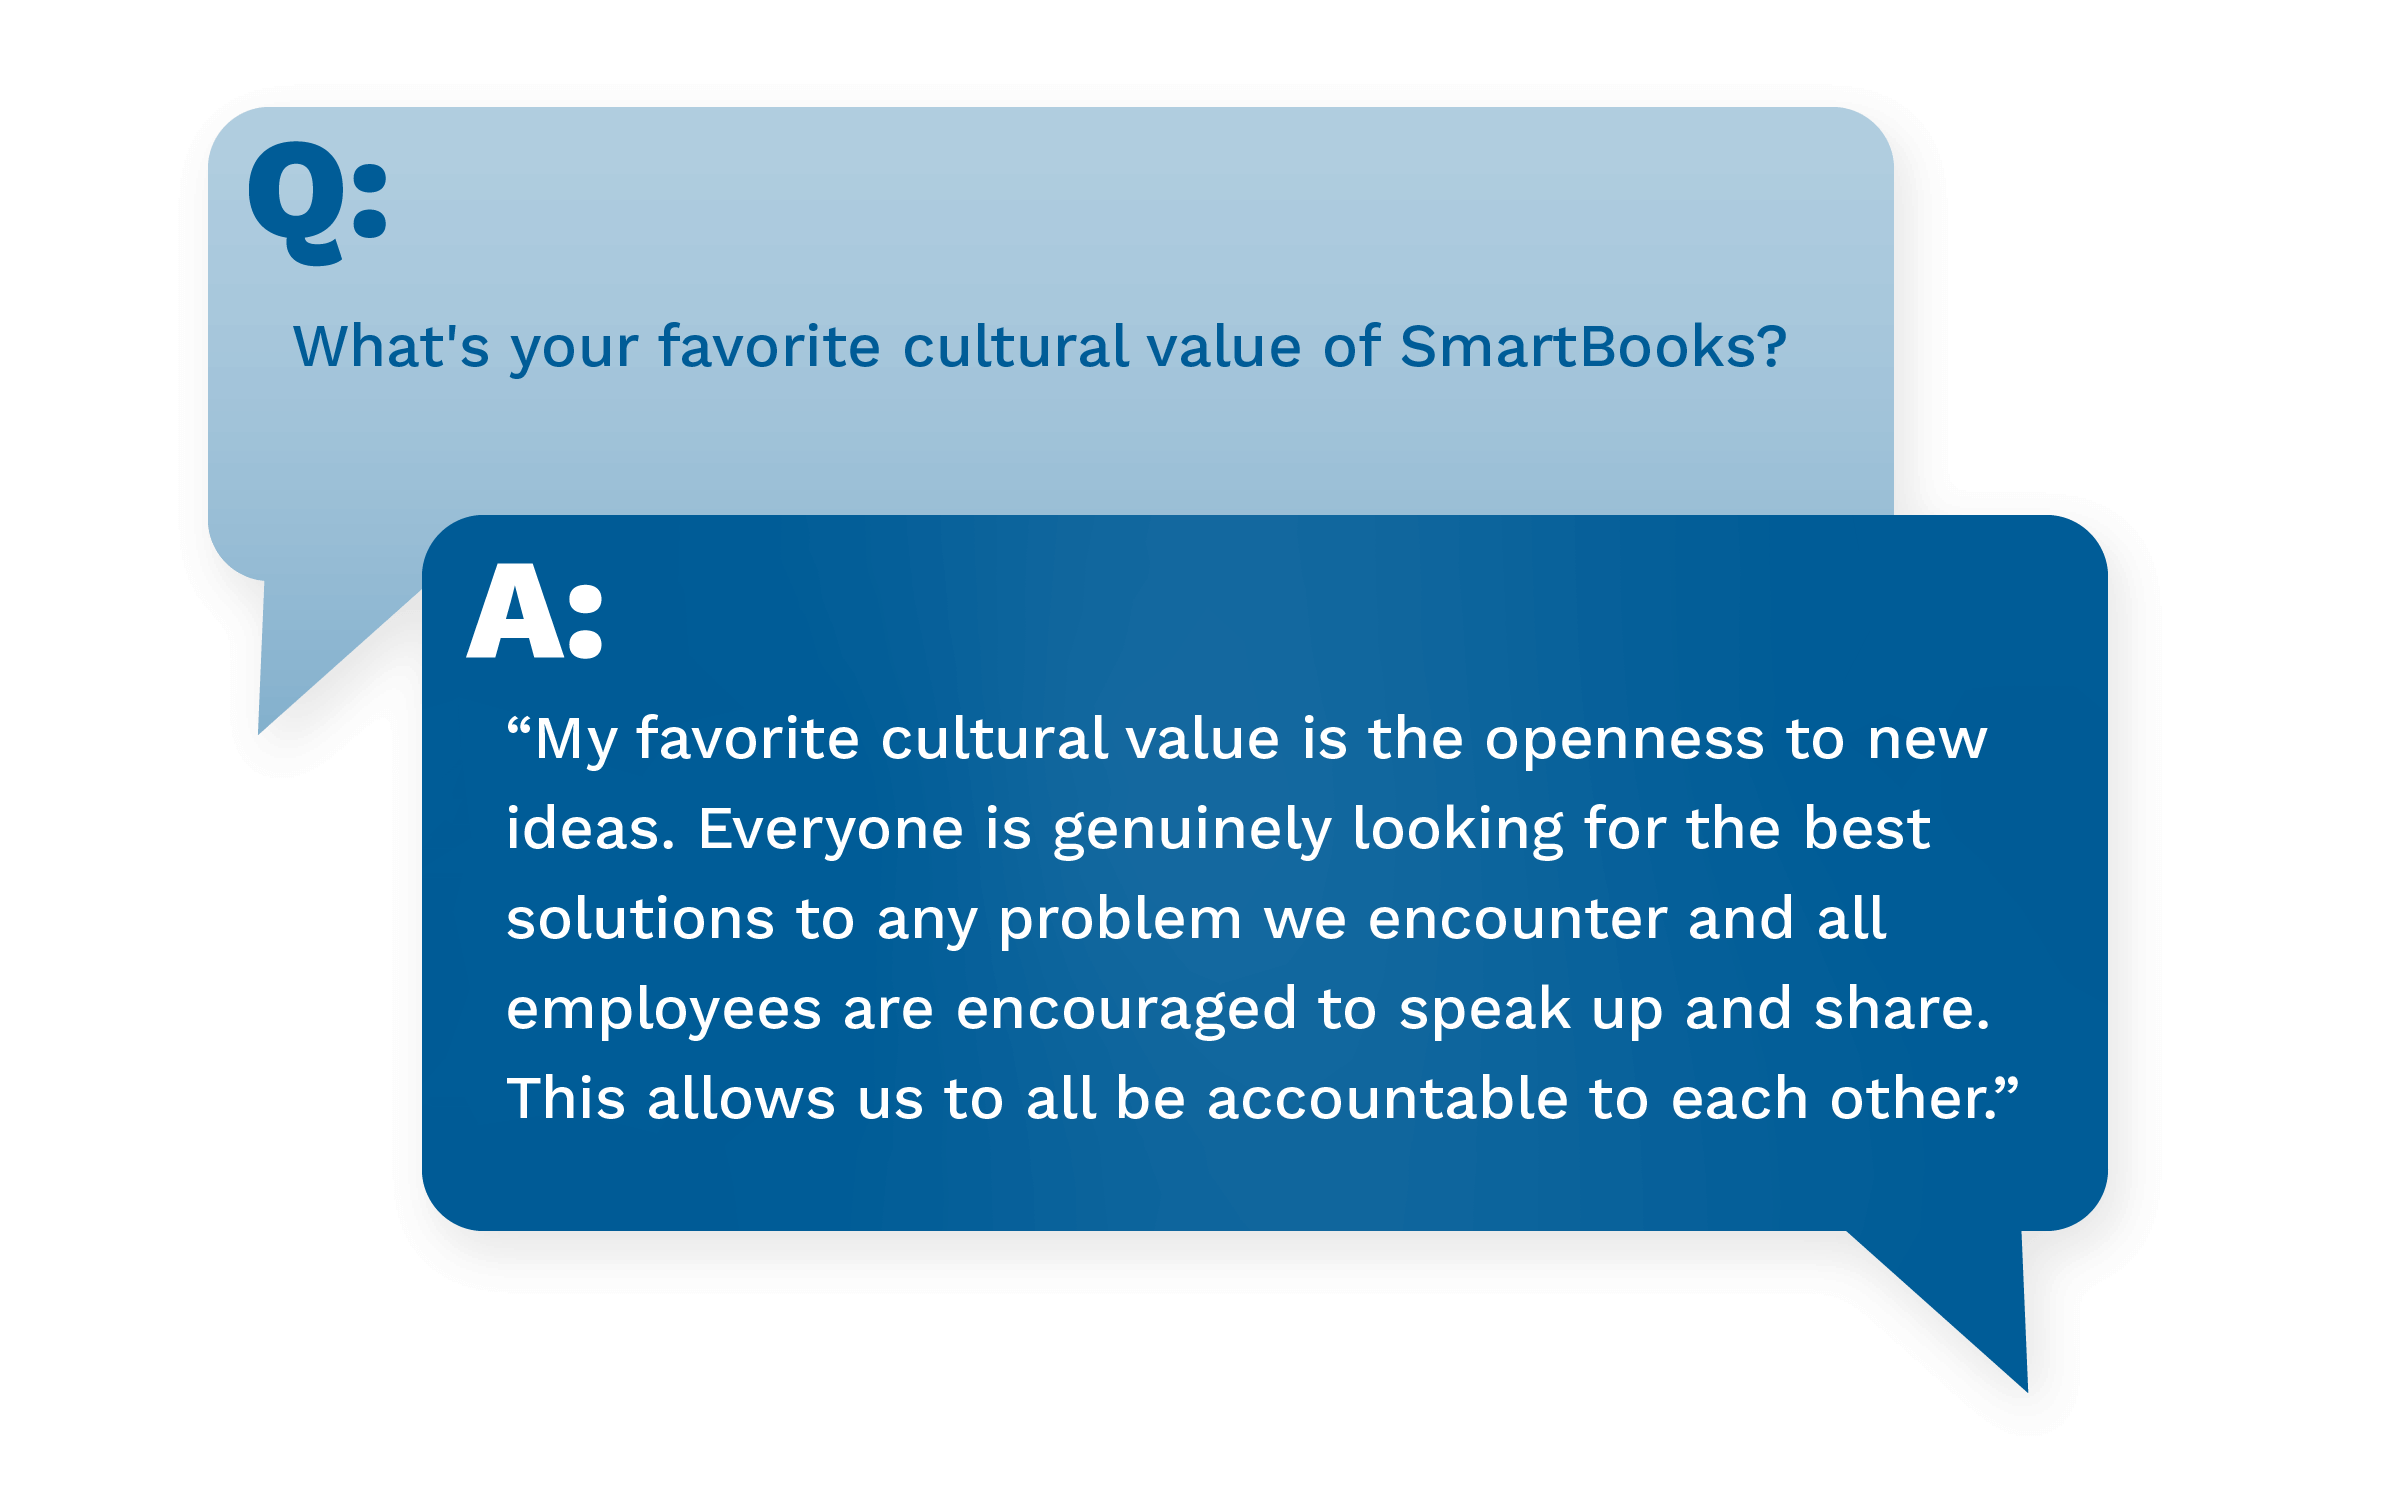 What's your favorite cultural value of SmartBooks?